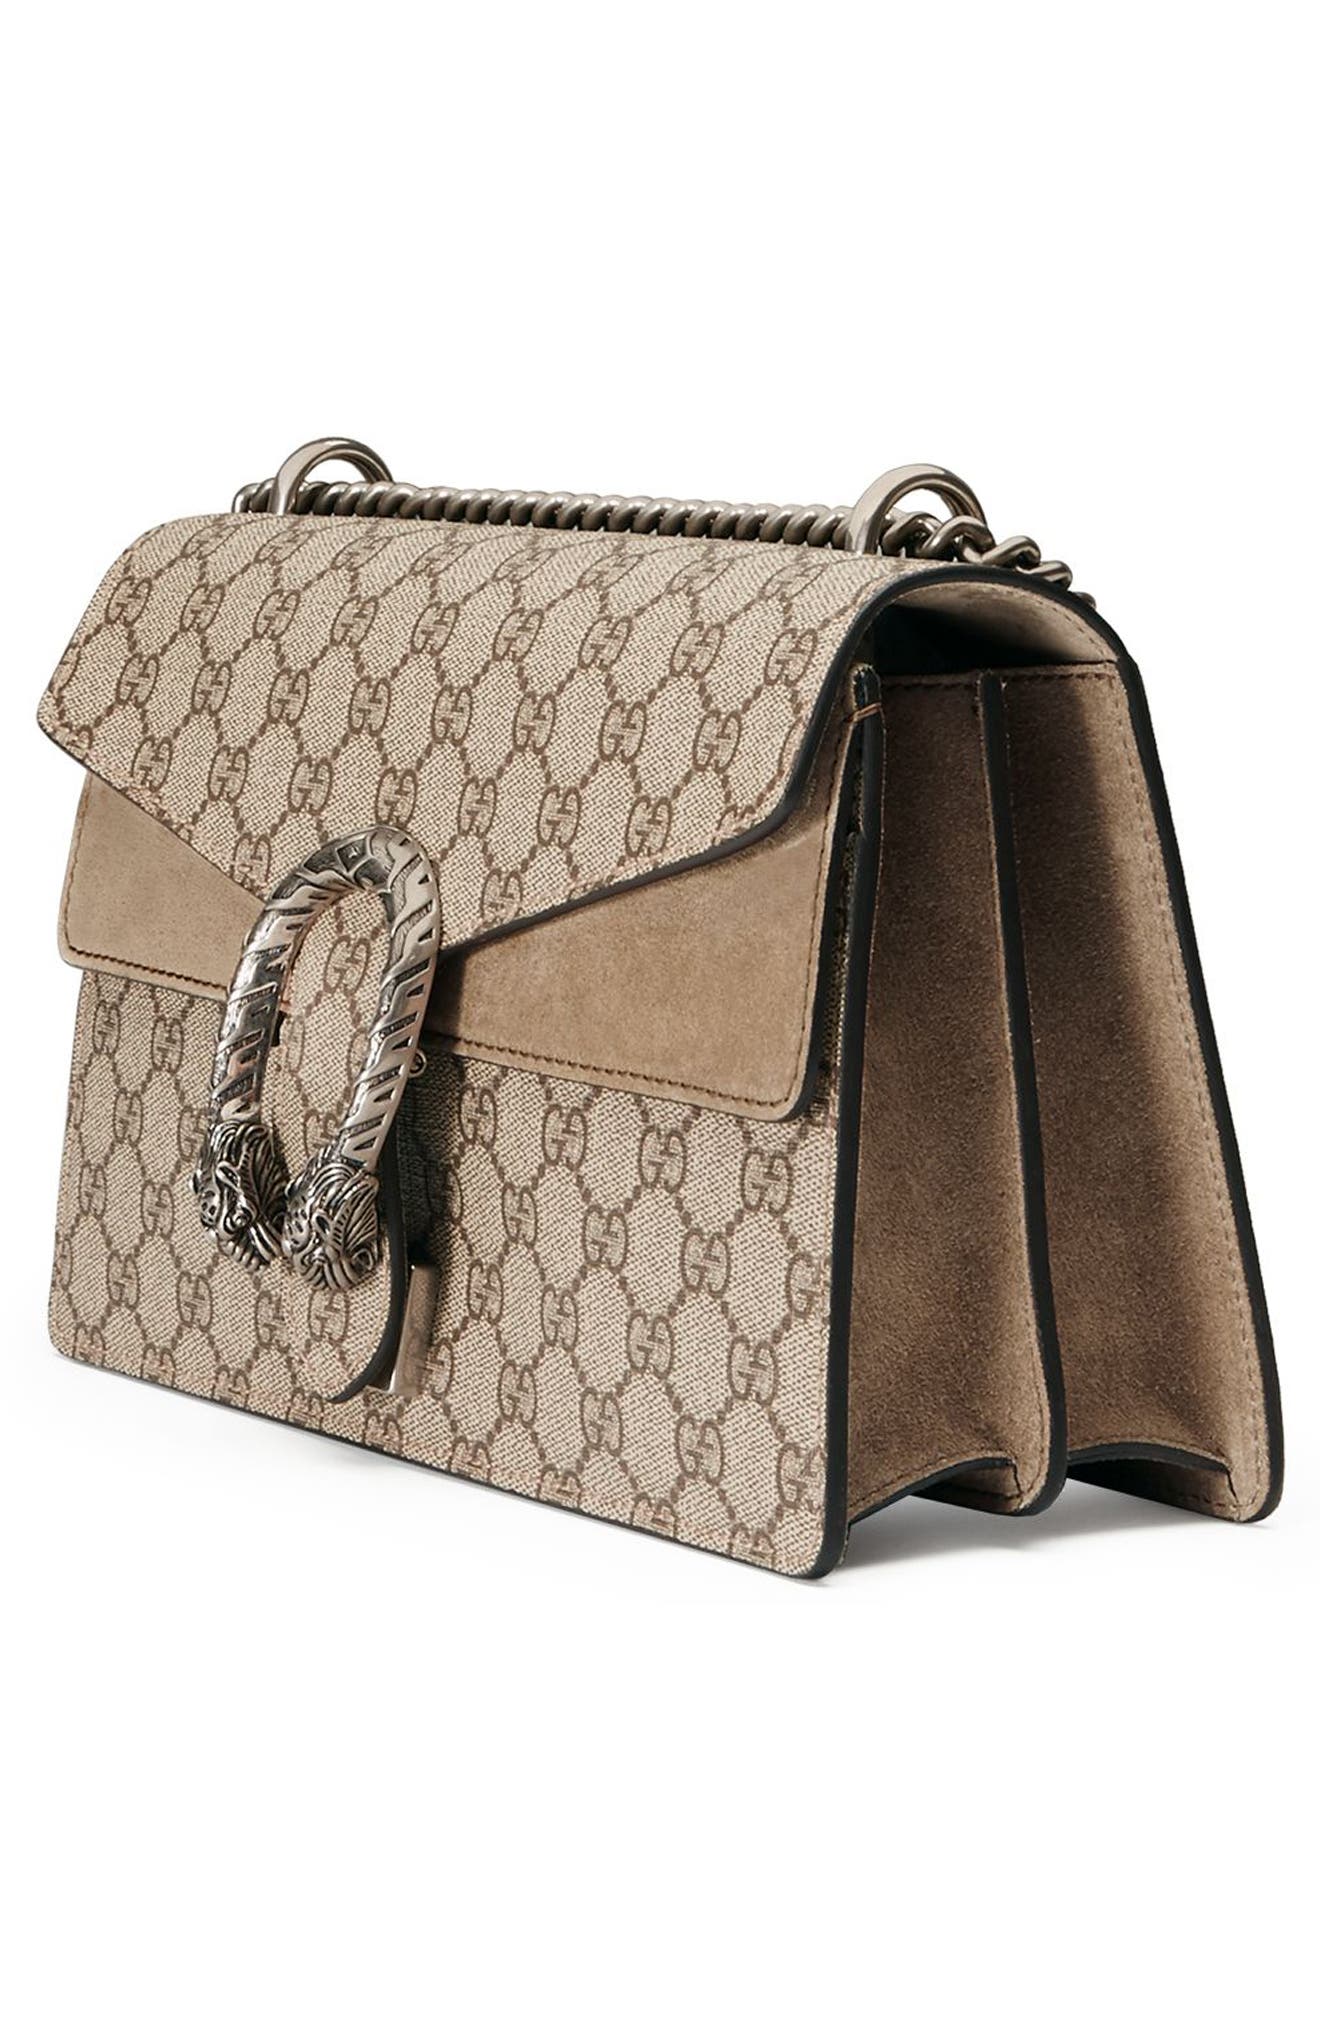 GUCCI SMALL DIONYSUS GG SUPREME CANVAS & SUEDE SHOULDER BAG - BEIGE, TAUPE | ModeSens